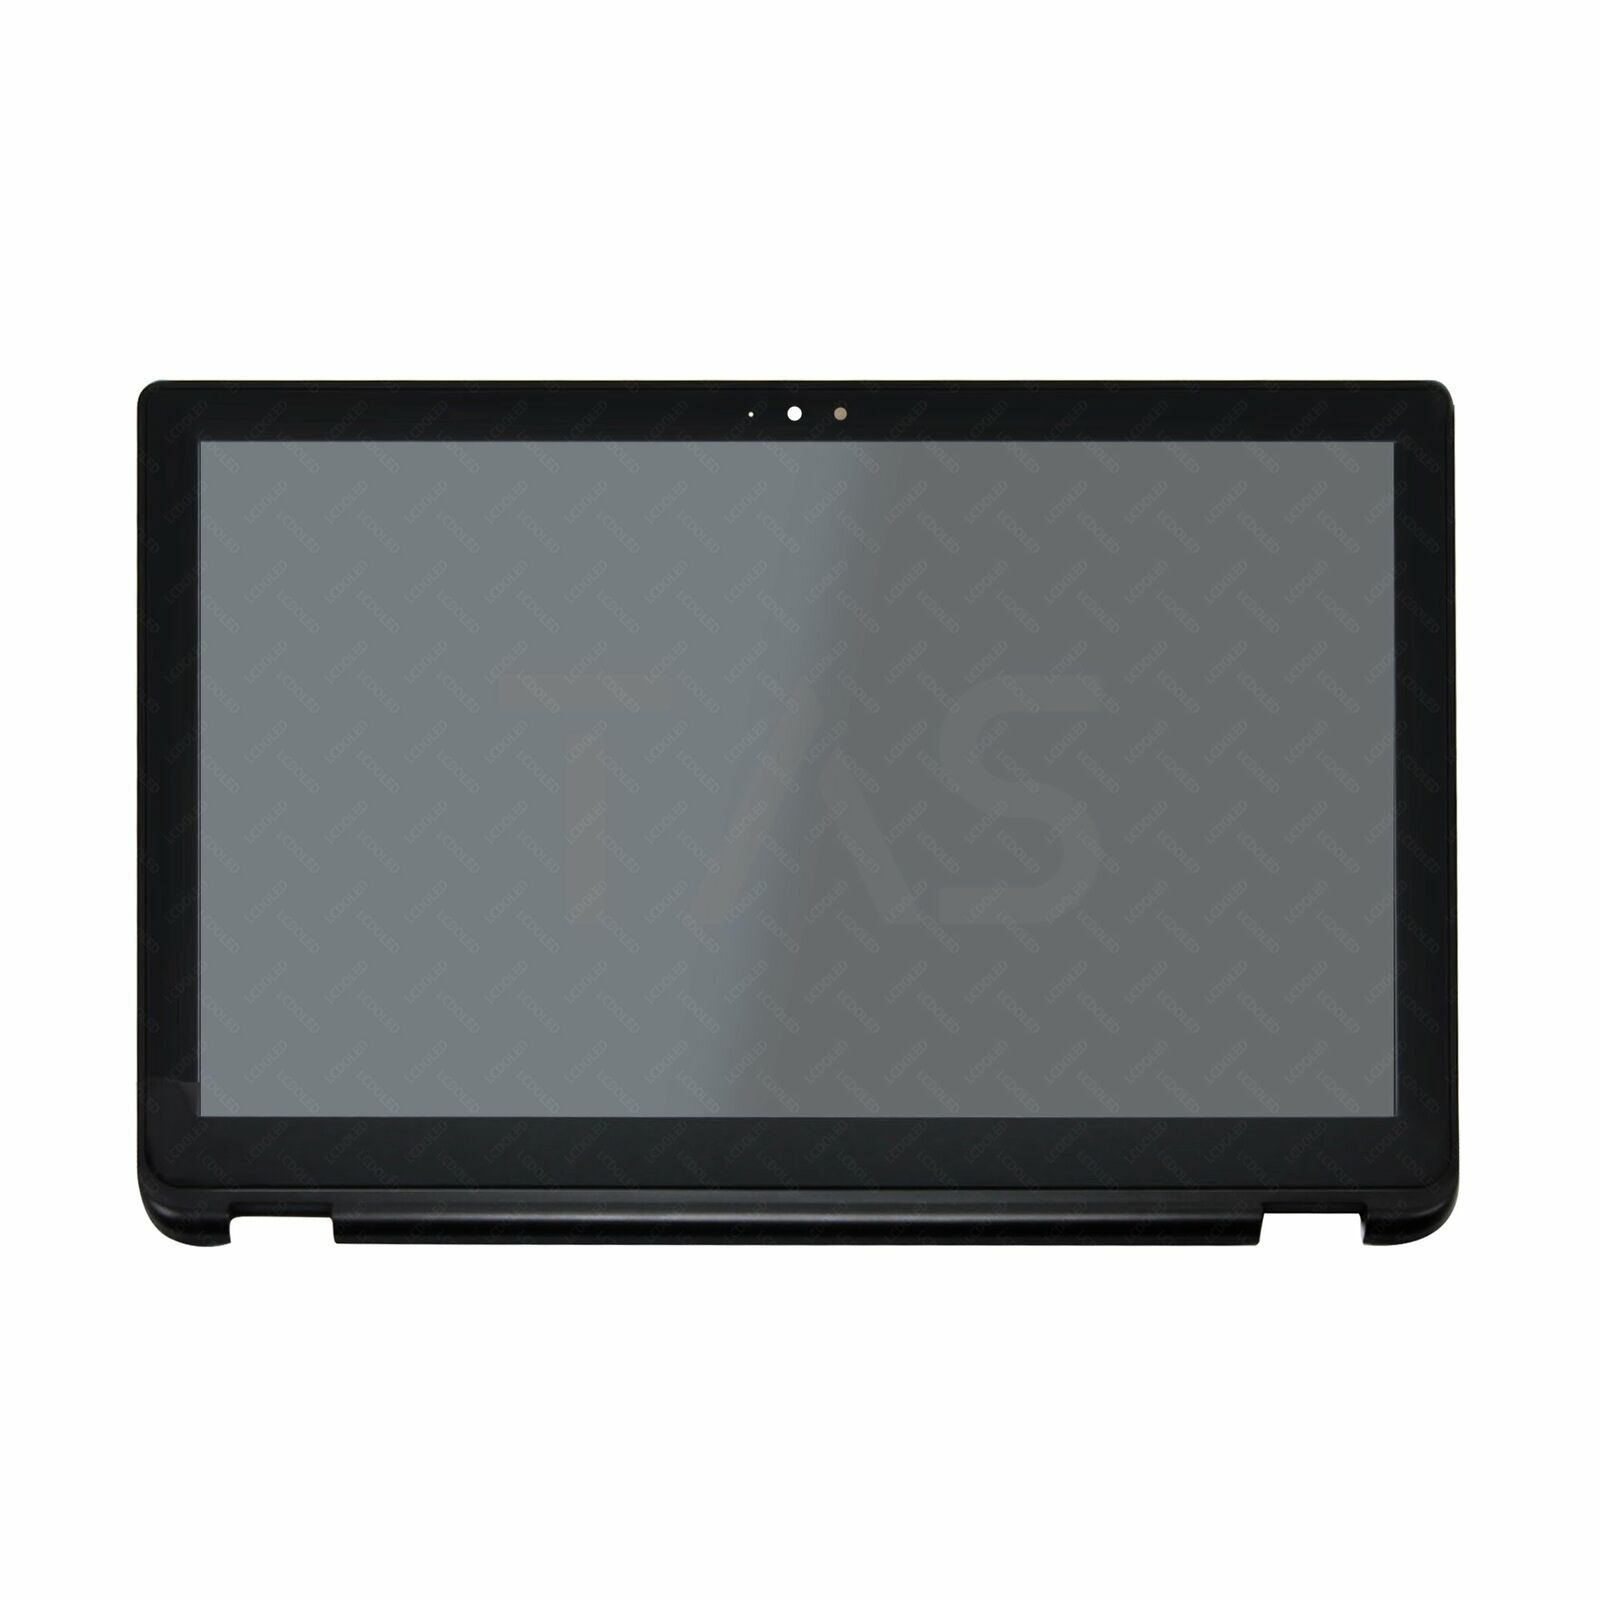 For Toshiba Satellite Radius P55W-B5224 FHD LED LCD Display Touch Screen + Bezel